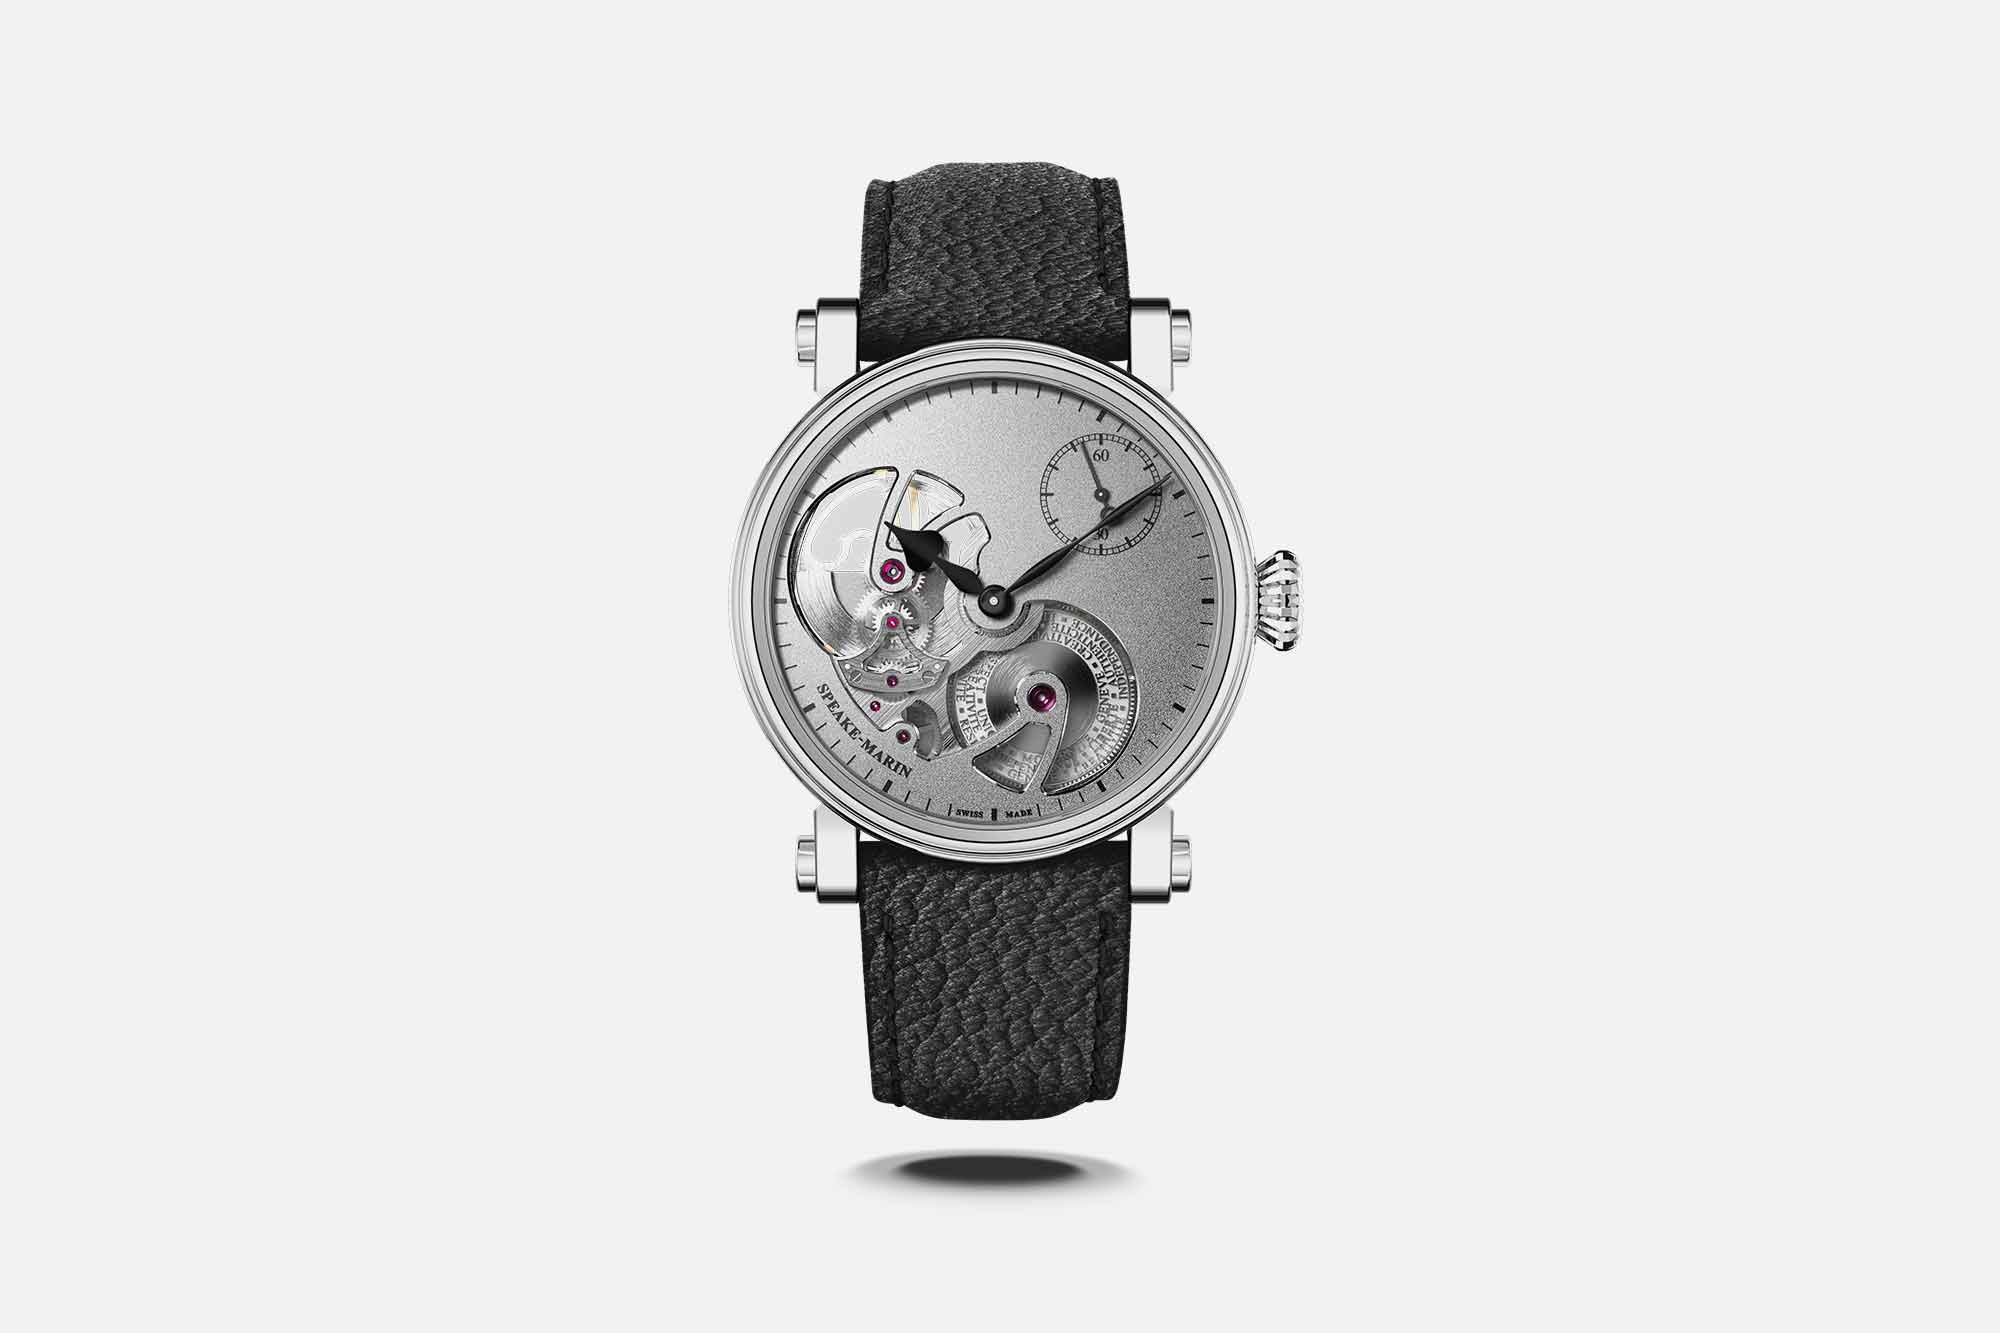 Speake Marin’s New Openworked Sandblasted Ti is a Sign that the Early 2000s Indie Favorite is in the Midst of a Comeback